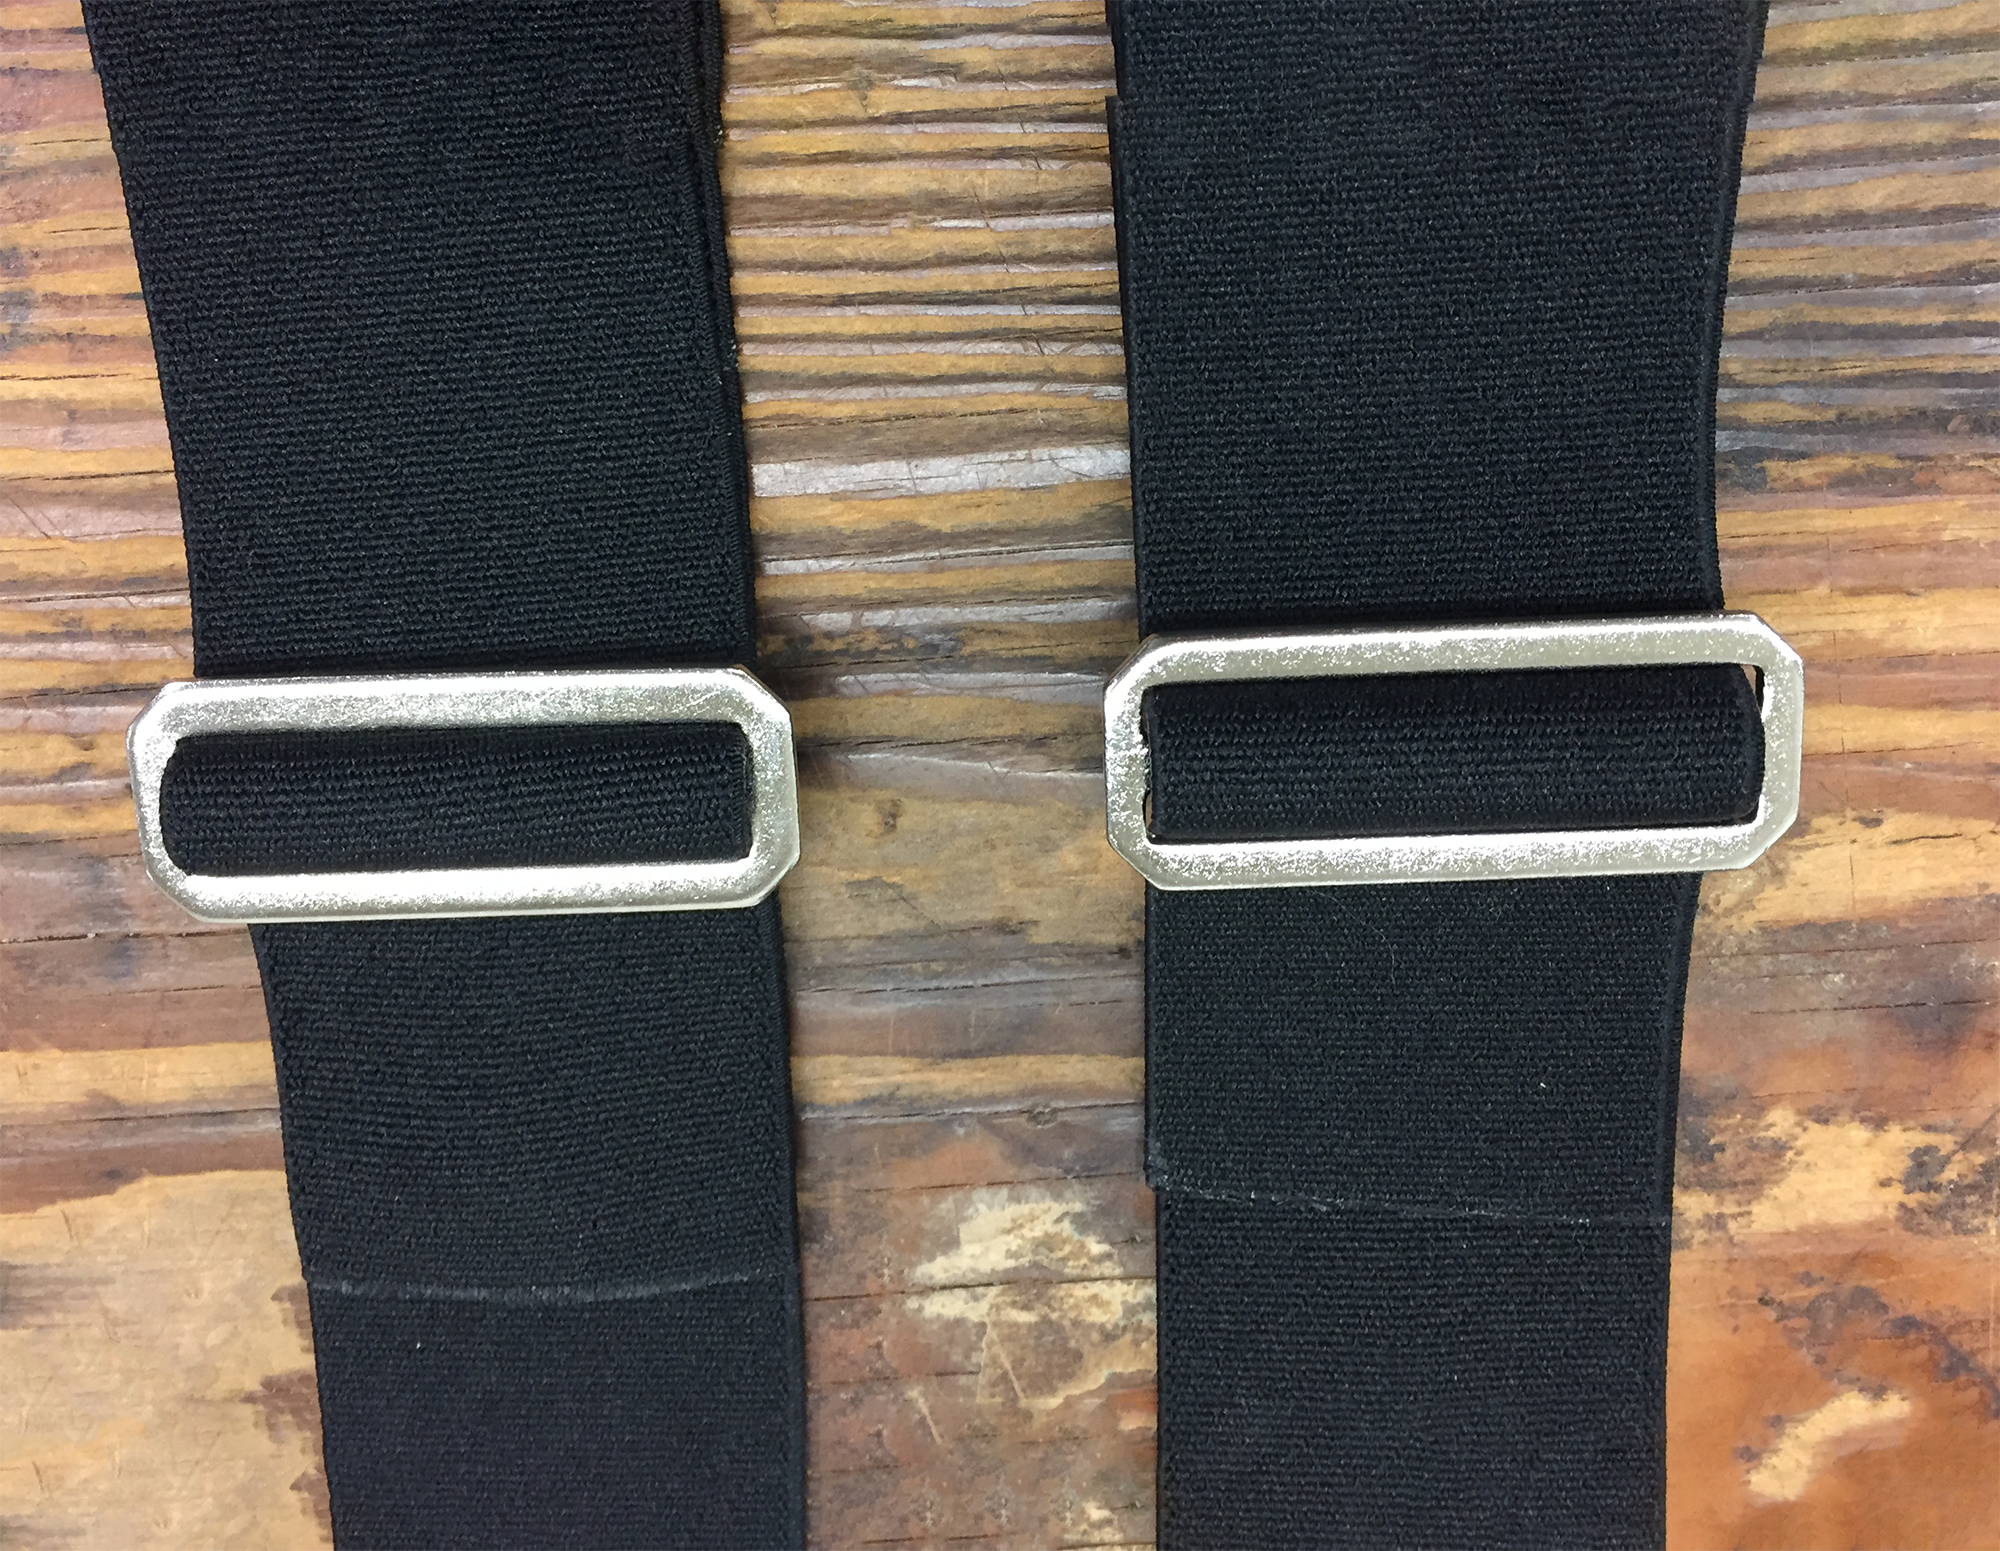 Two metal slides with elastic